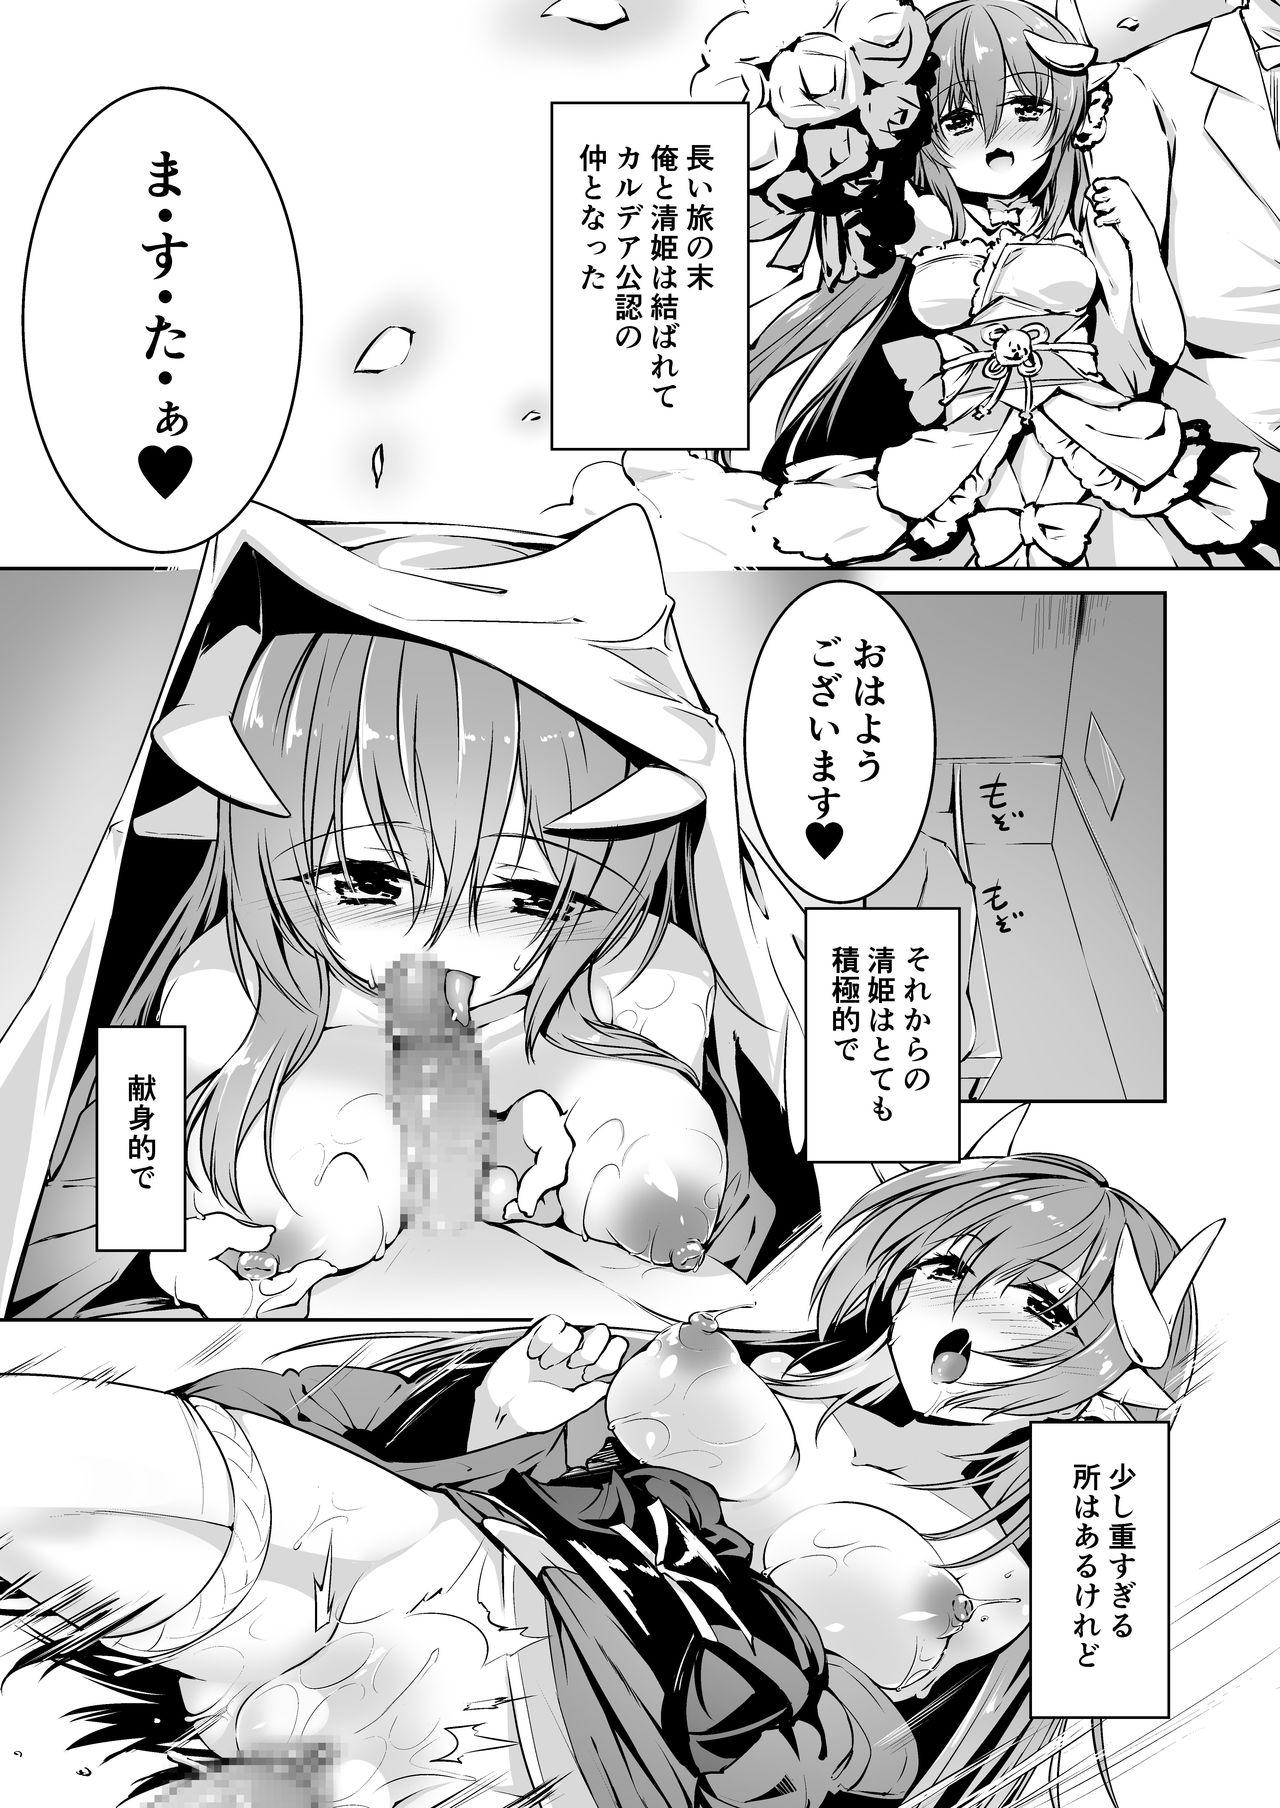 Cocks Kiyohime Lovers vol. 02 - Fate grand order Boob - Page 4